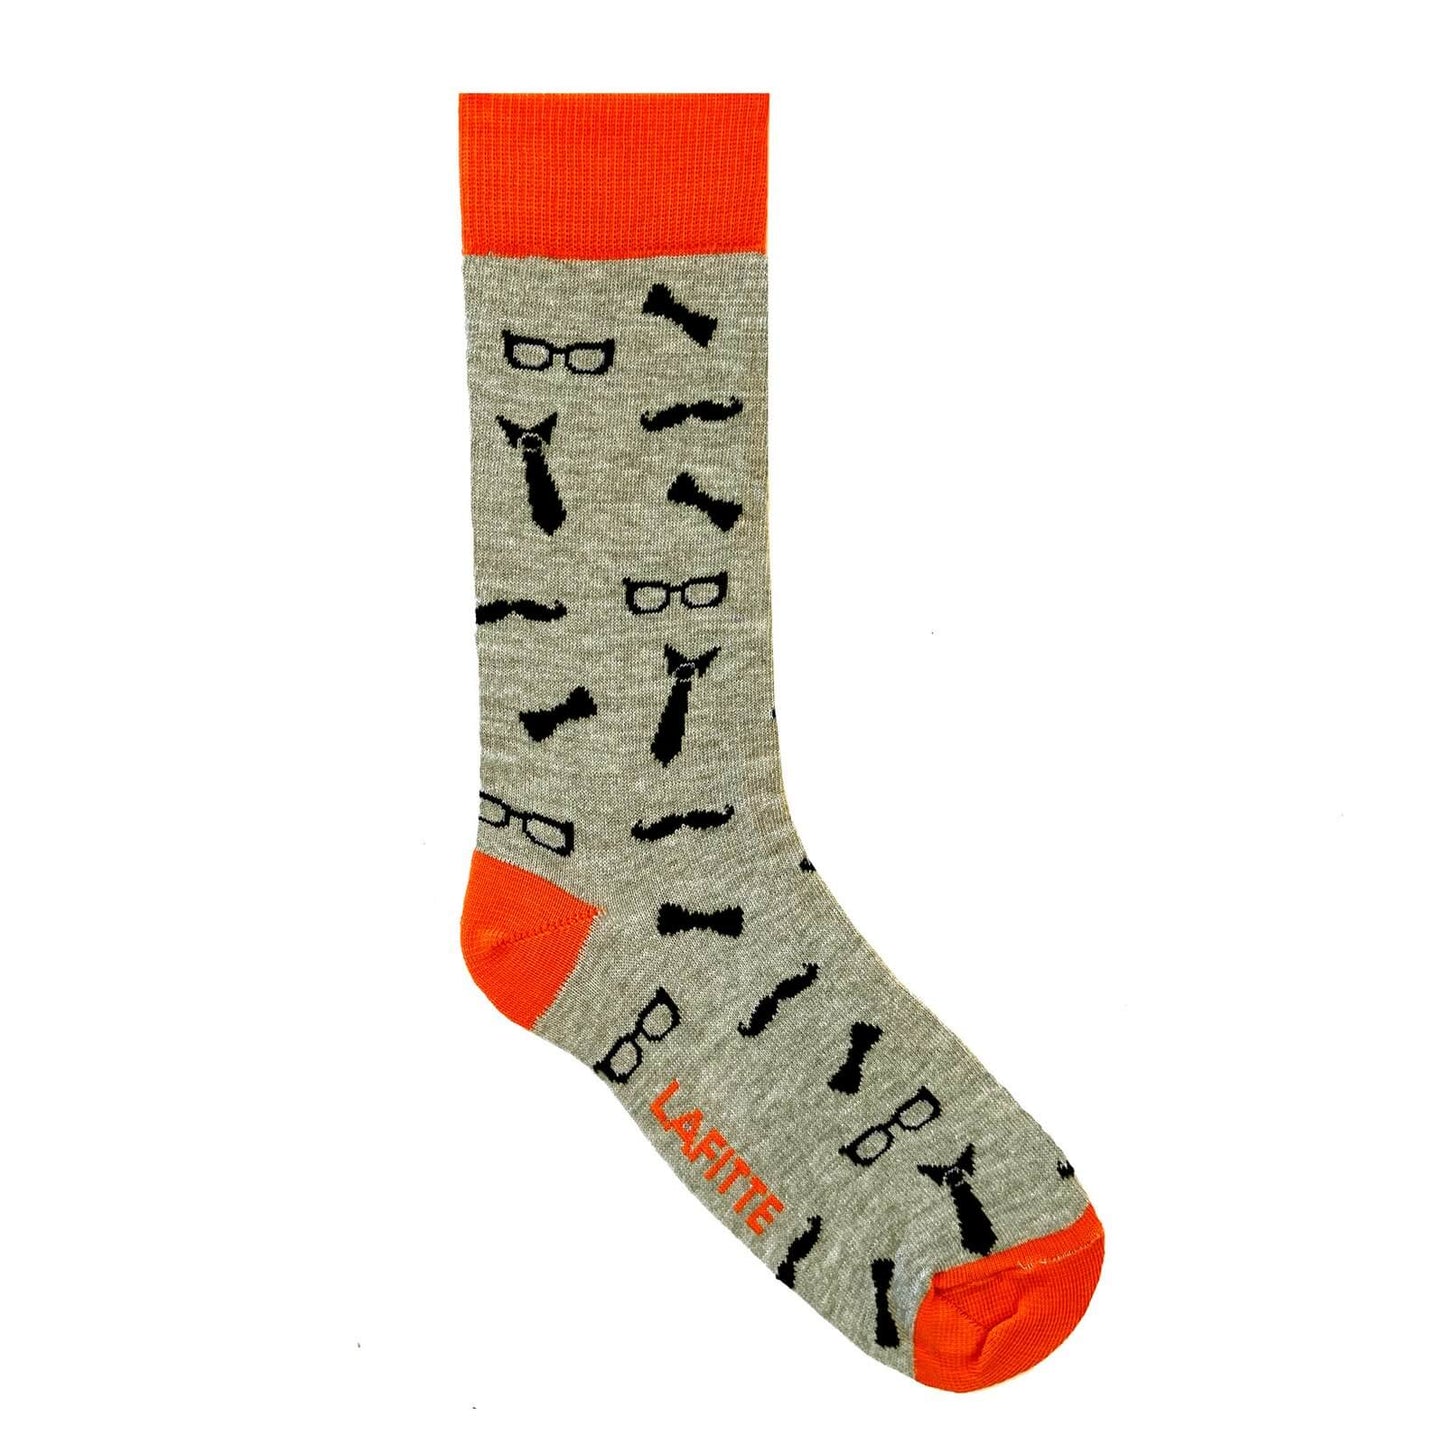 Australian made novelty socks. Colour is light grey with orange trims. Prints of moustache, bow tie, glasses, necktie all over.